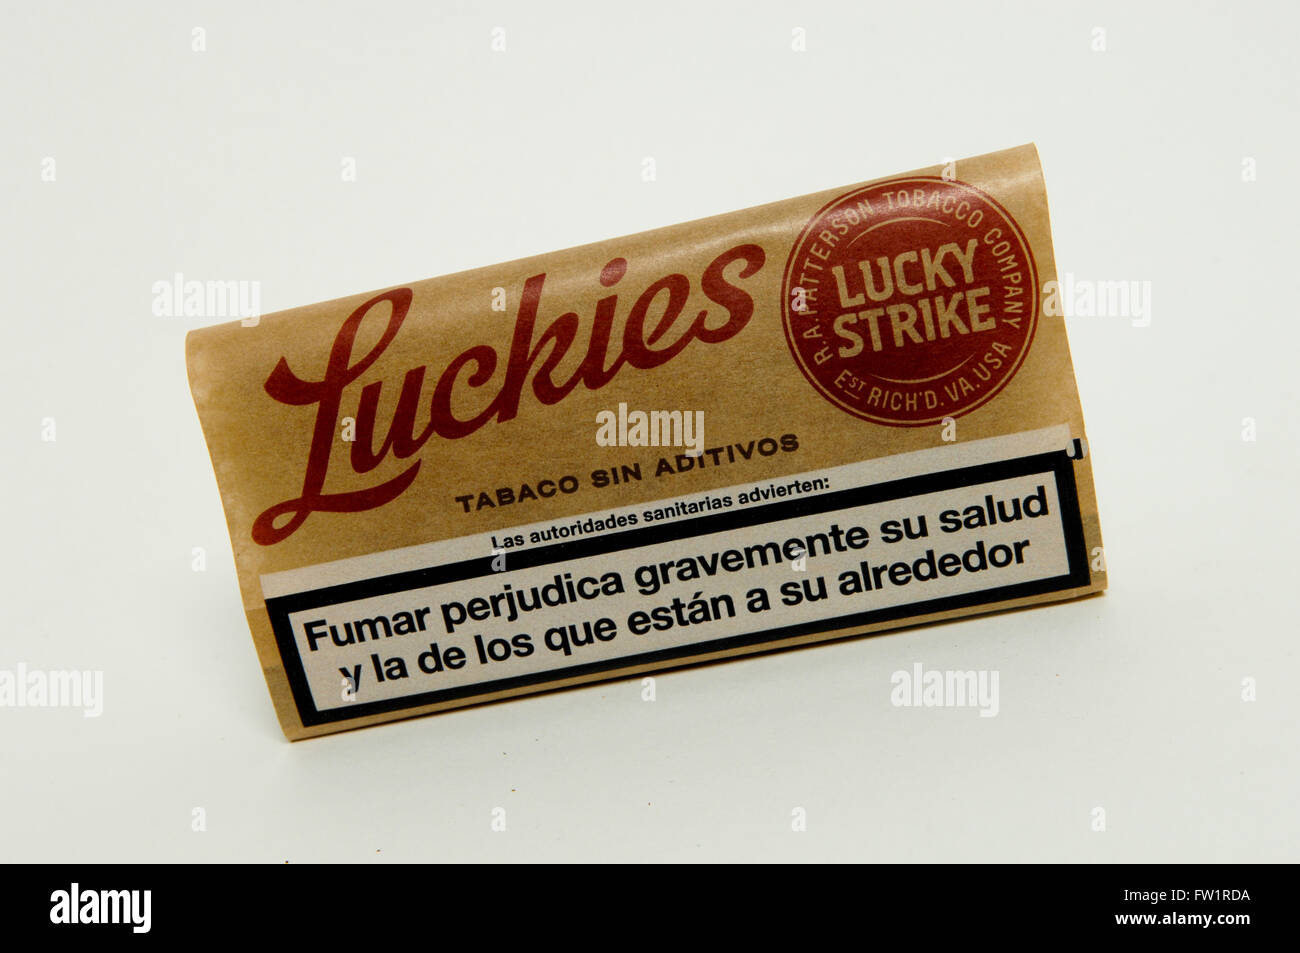 Lucky Strike Rolling Tobacco Stock Photo